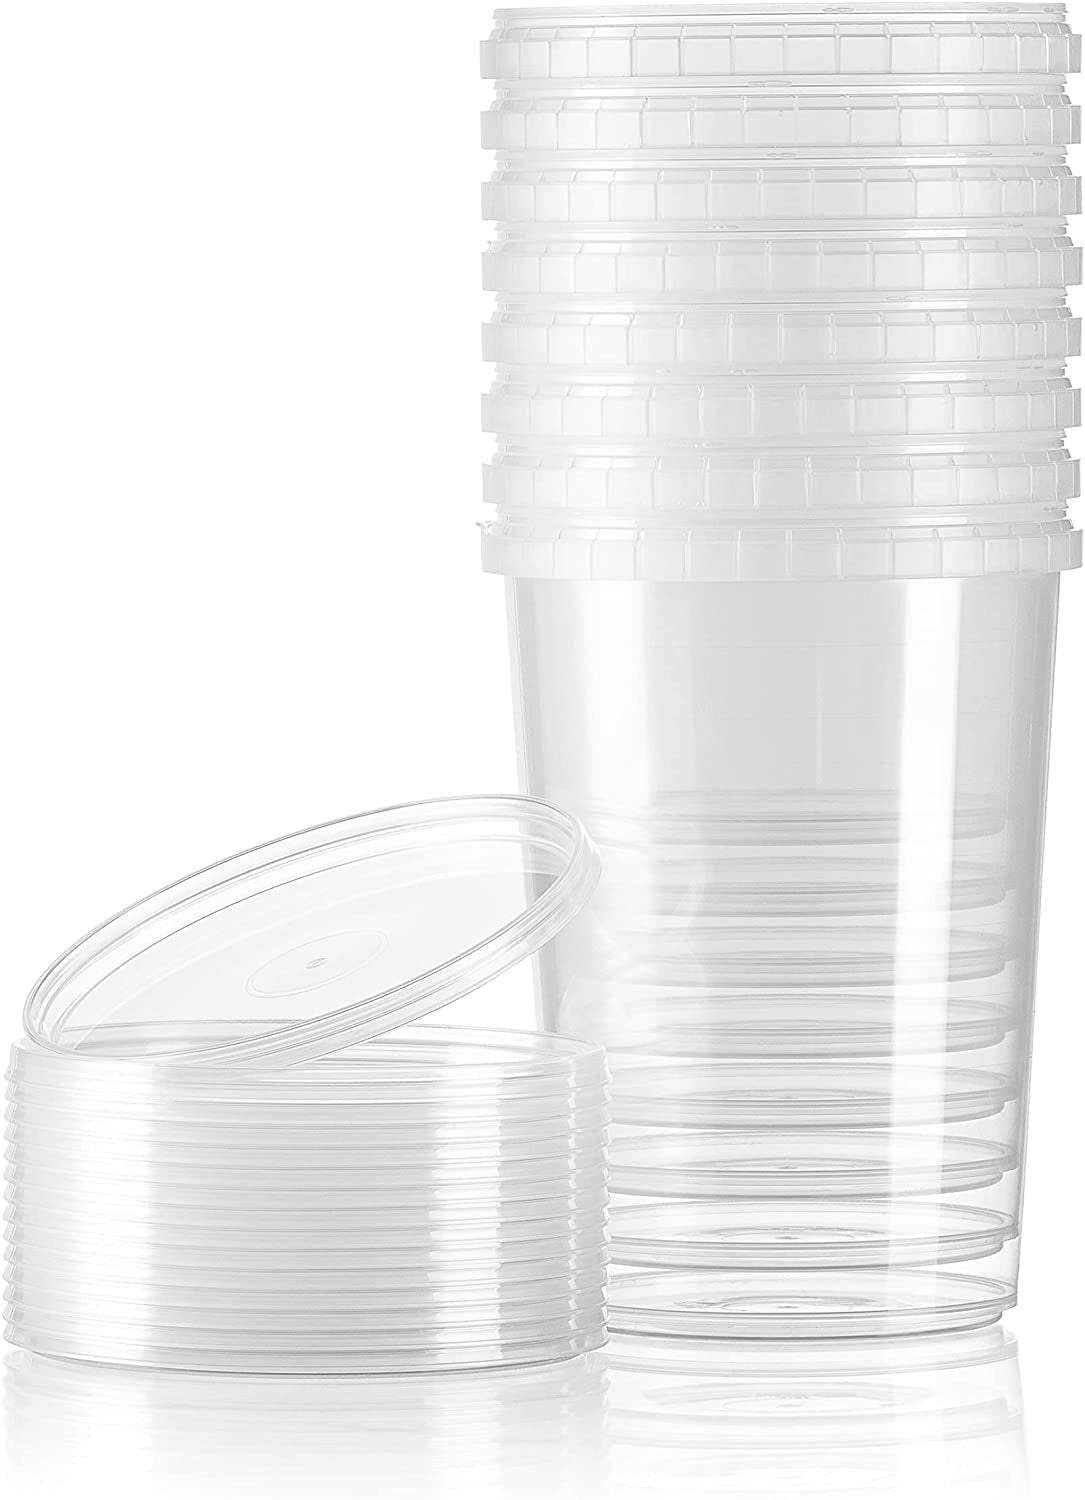 NYHI 16-oz. Square Clear Deli Containers with Lids | Stackable, Tamper-Proof BPA-Free Food Storage Containers | Recyclable Space